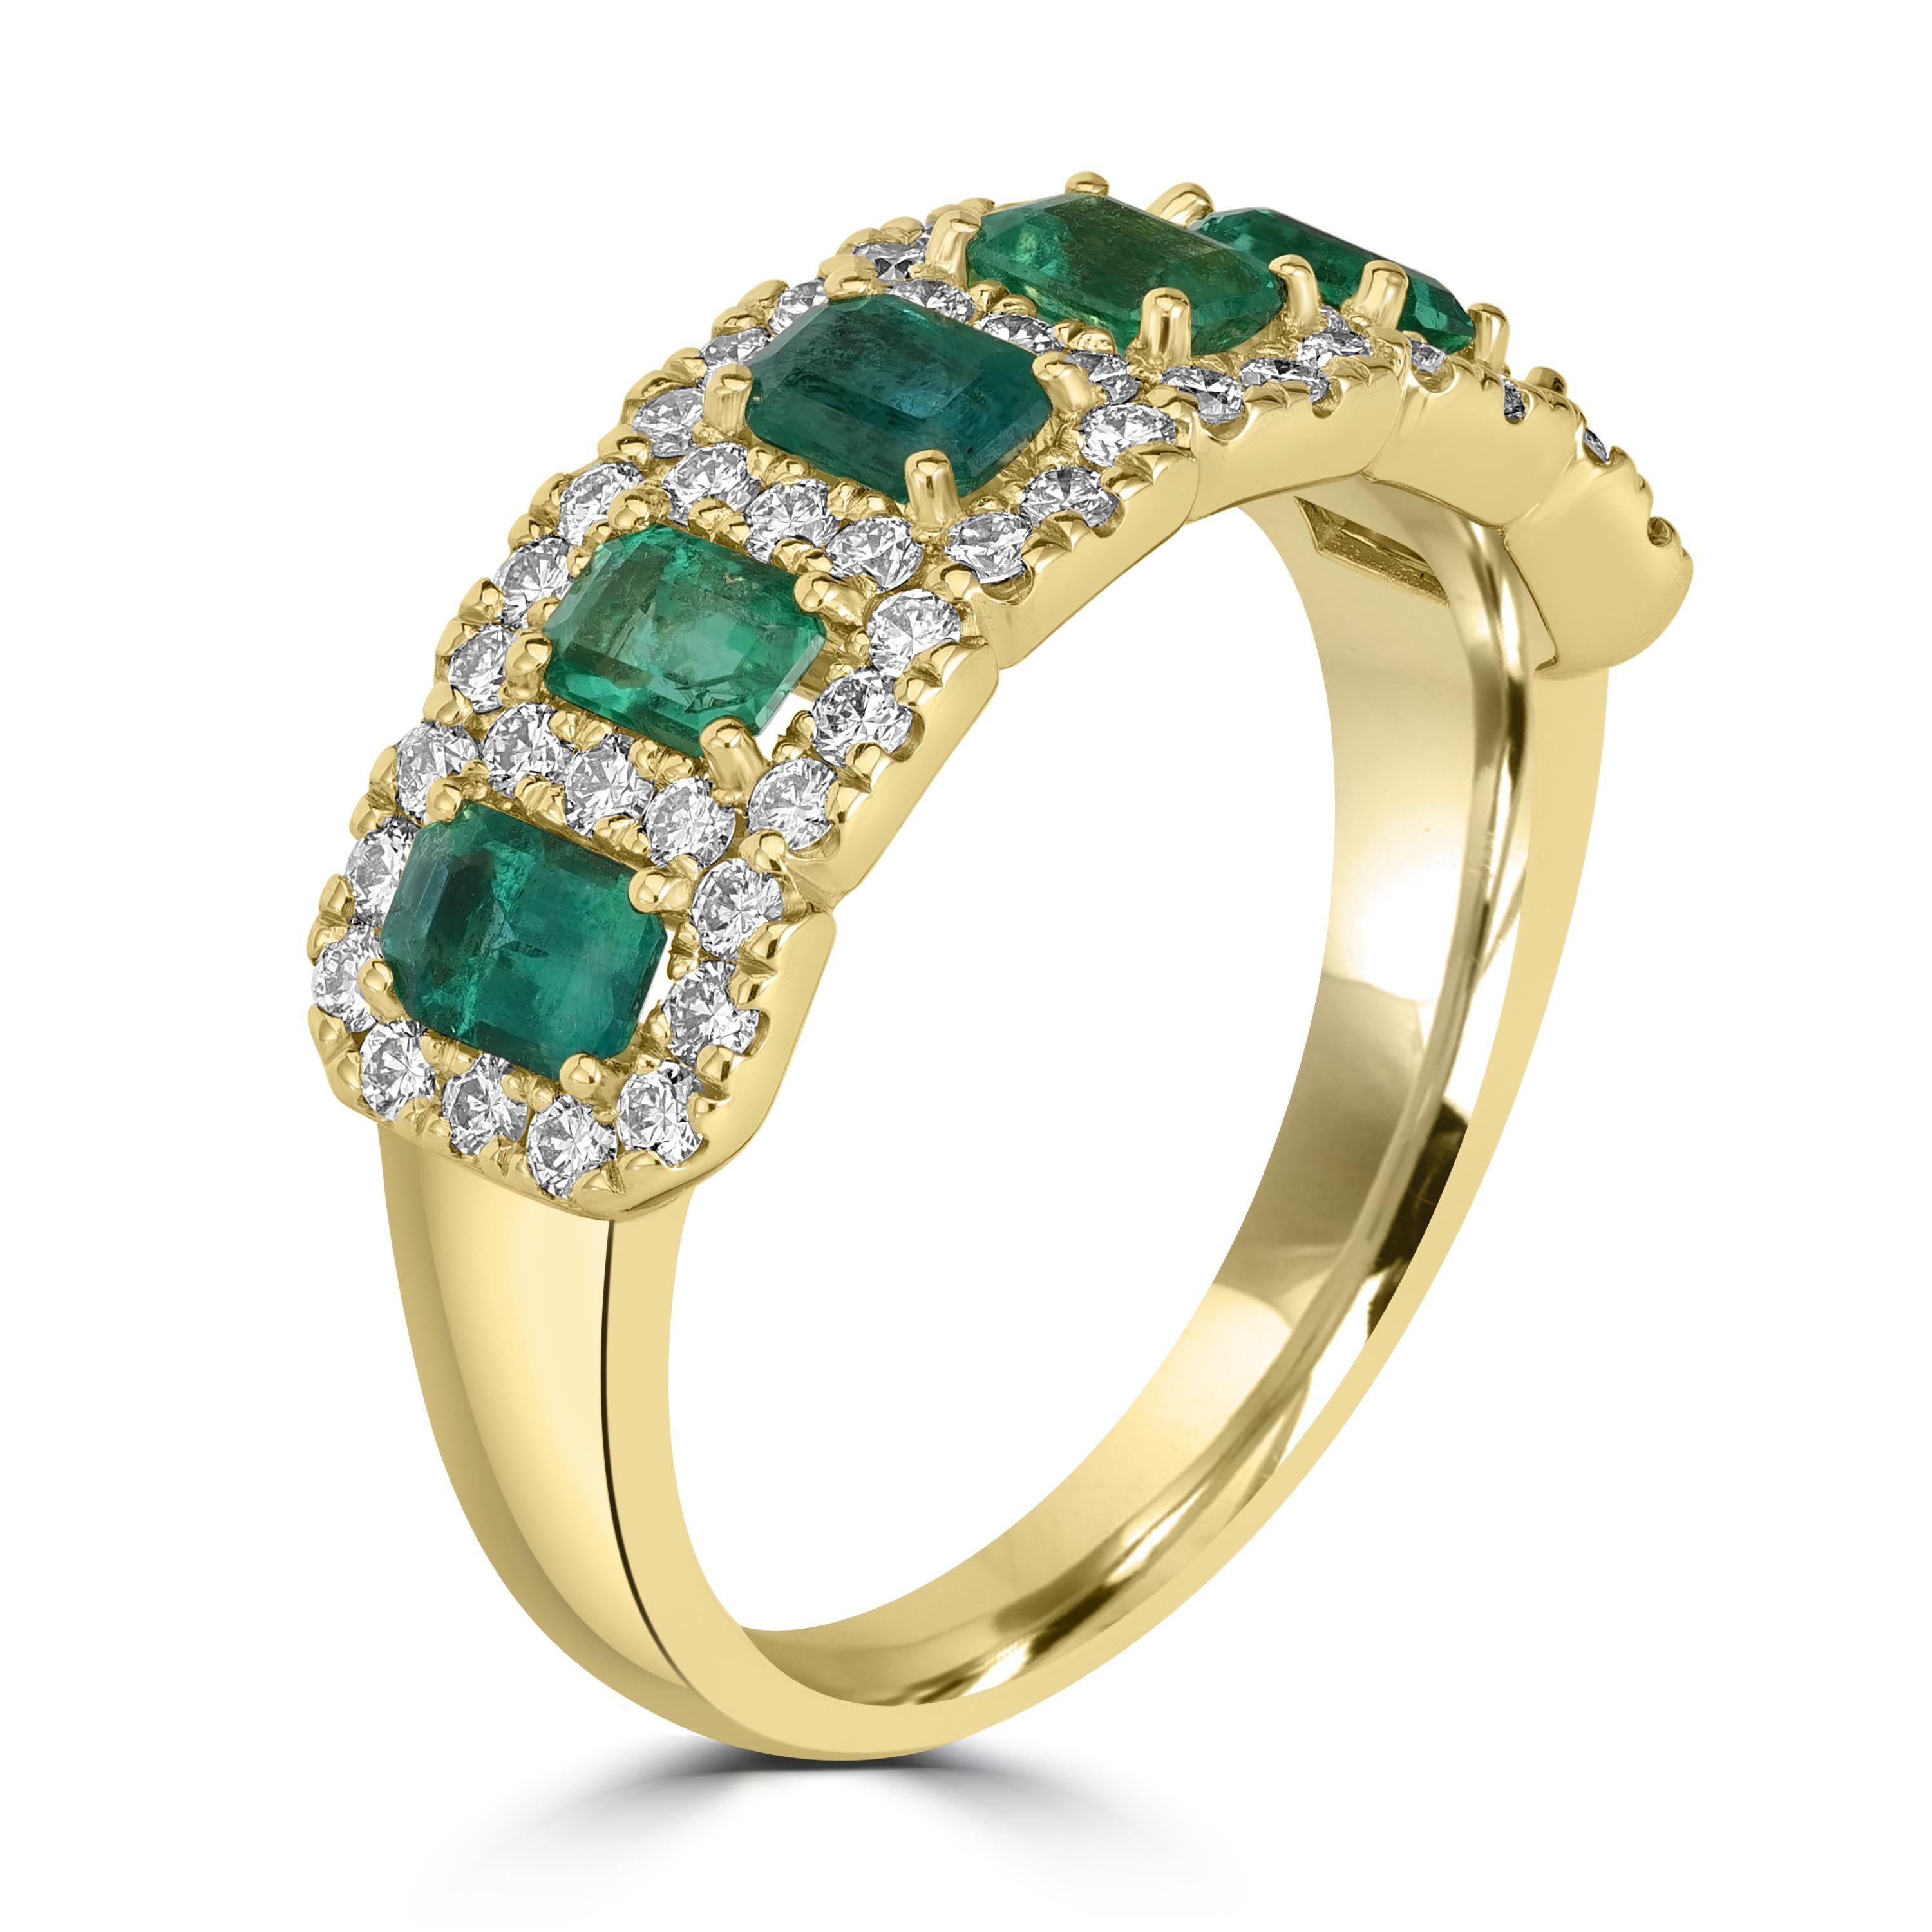 Unveil the epitome of elegance with our enchanting 1.53 Carat Emerald Cut Emerald Half Eternity Ring Band, adorned with dazzling diamonds, set in luxurious 18k yellow gold.

Experience the allure of nature's finest hues with this exquisite ring,